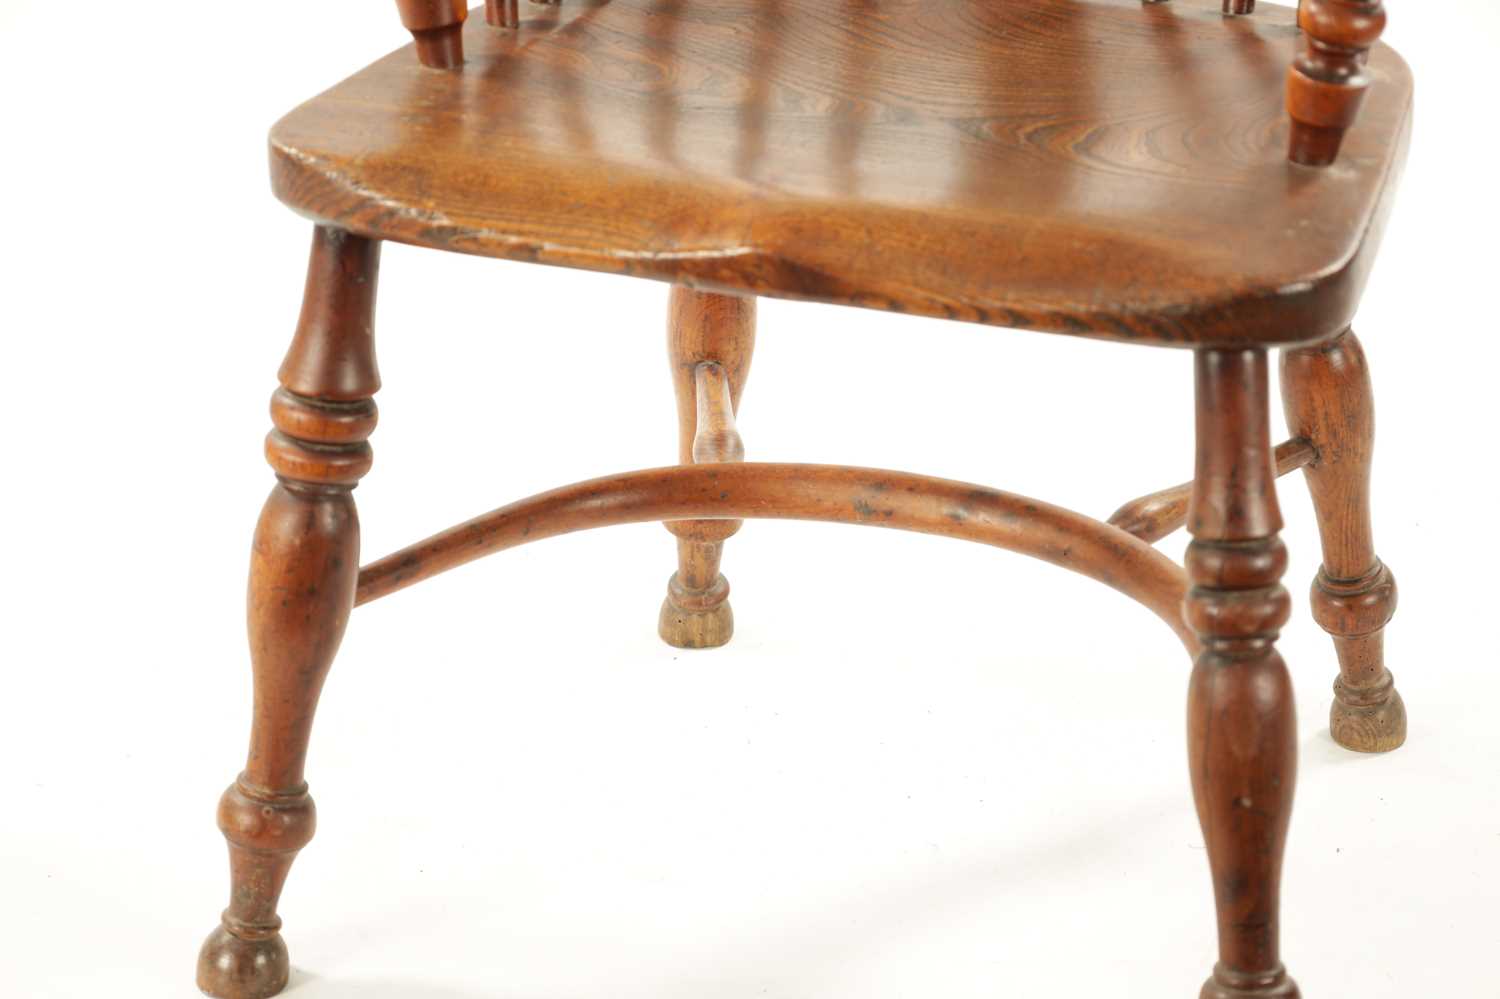 AN EARLY 19TH CENTURY NOTTINGHAMSHIRE YEW-WOOD LOW BACK WINDSOR CHAIR - Image 4 of 8